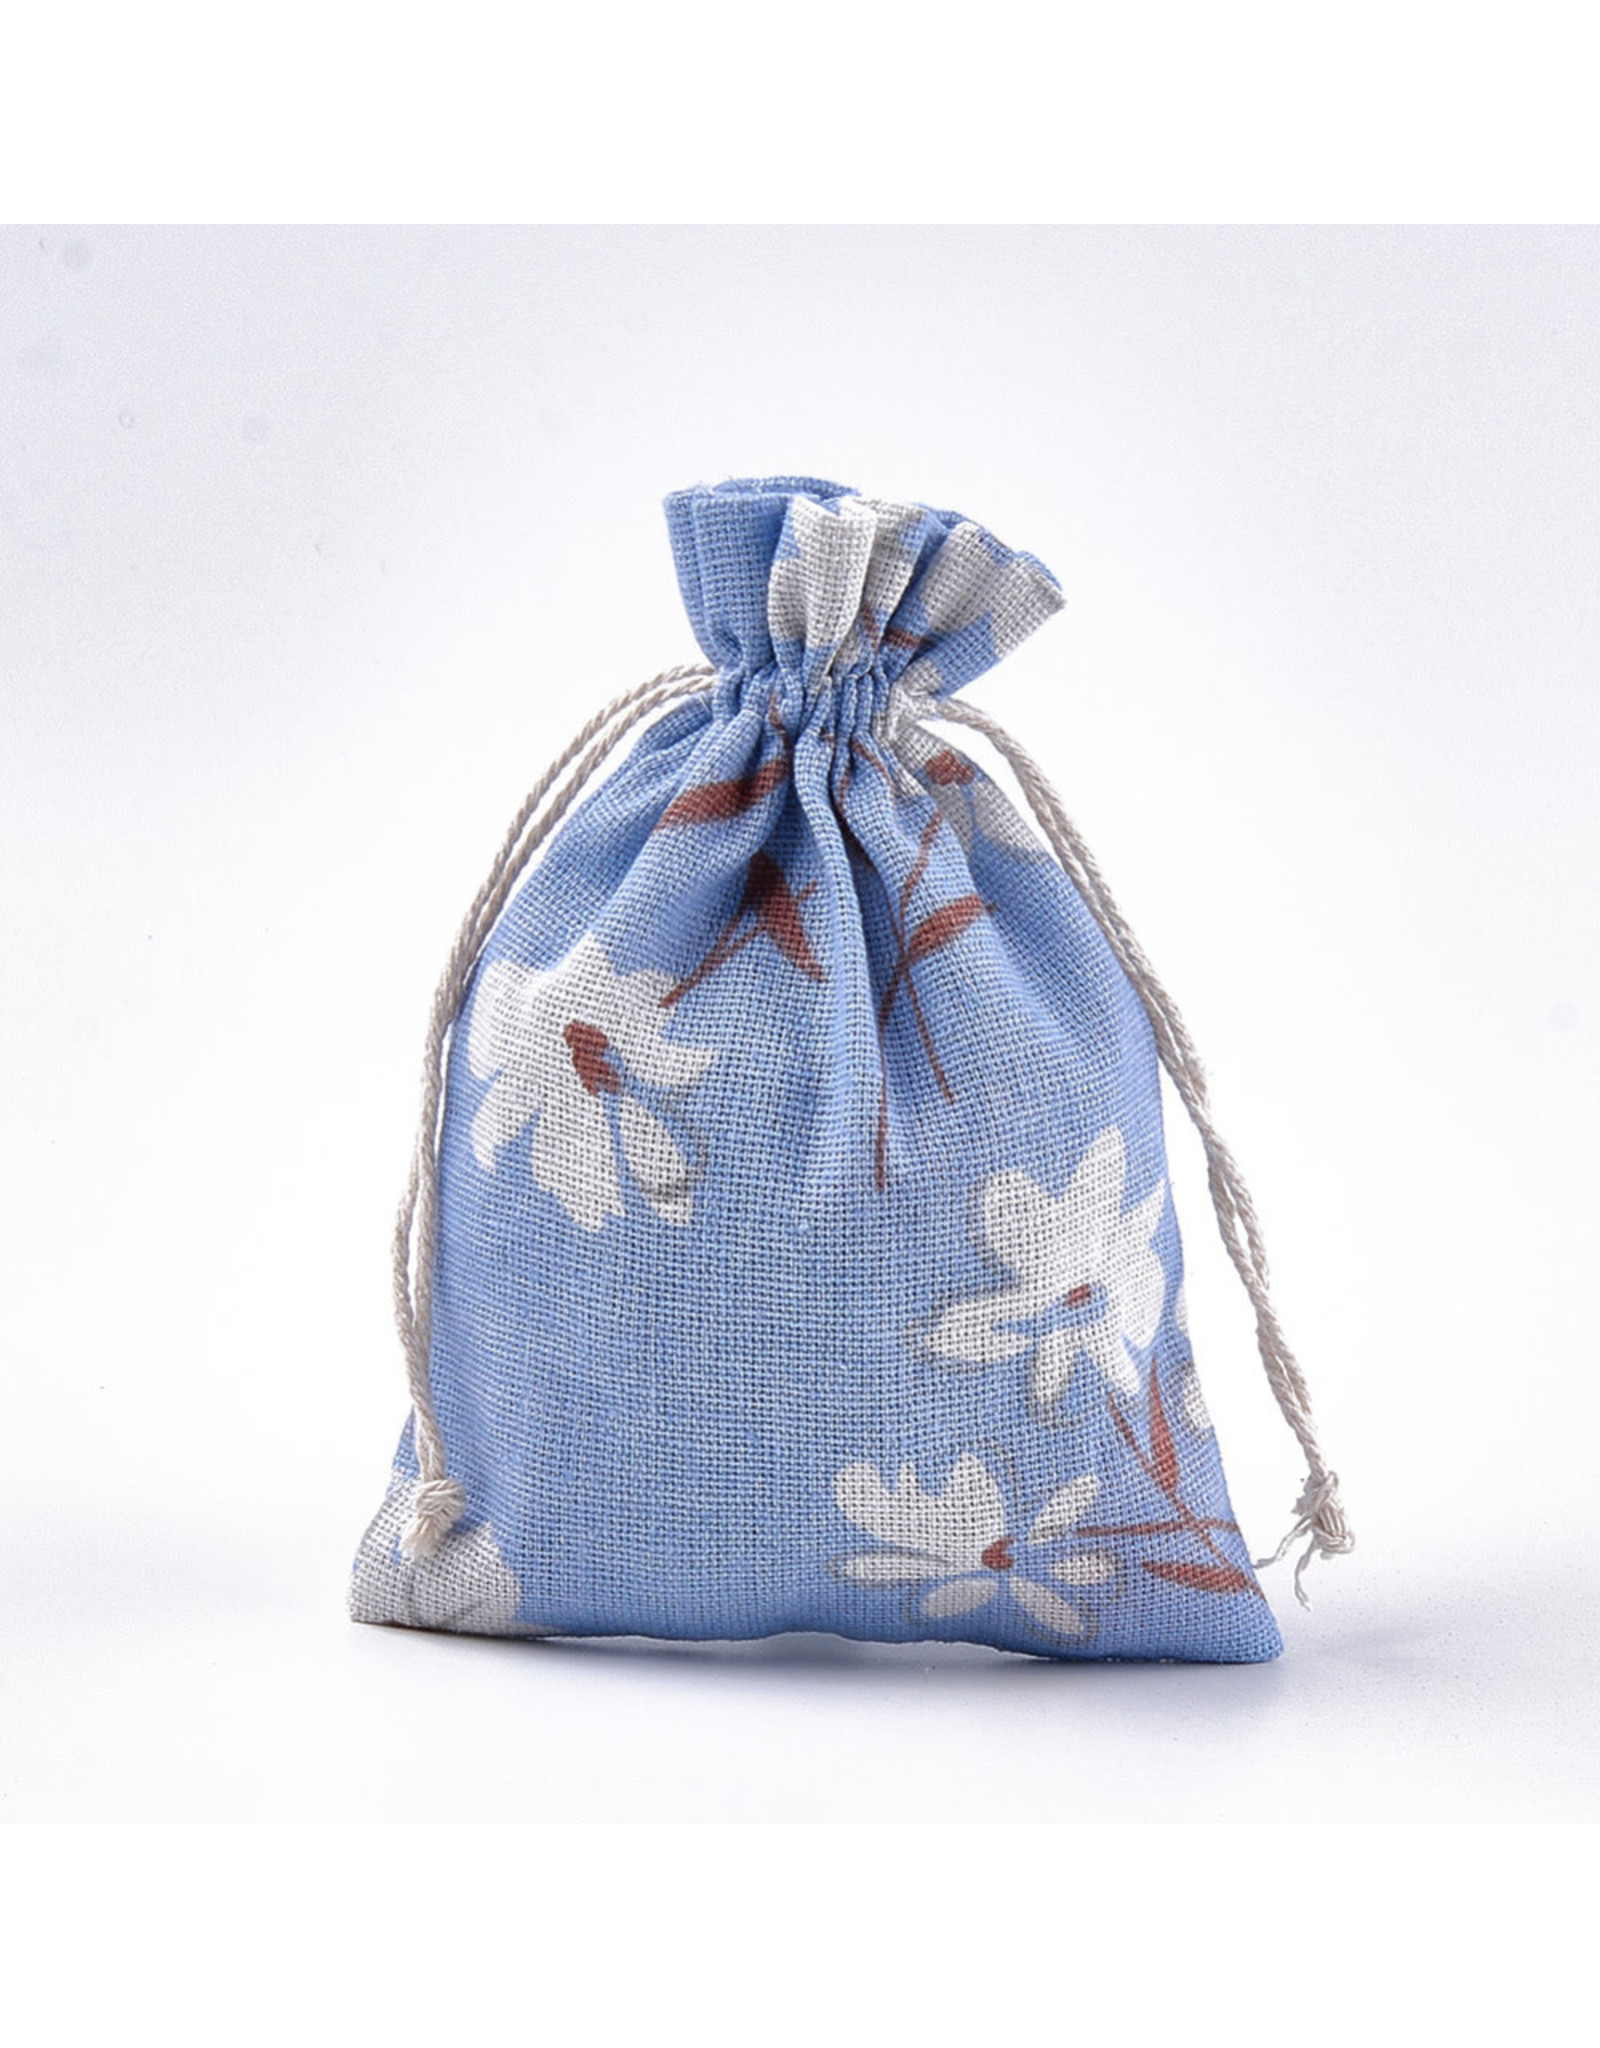 Gift Bag Blue with Flower  14x10cm  x5